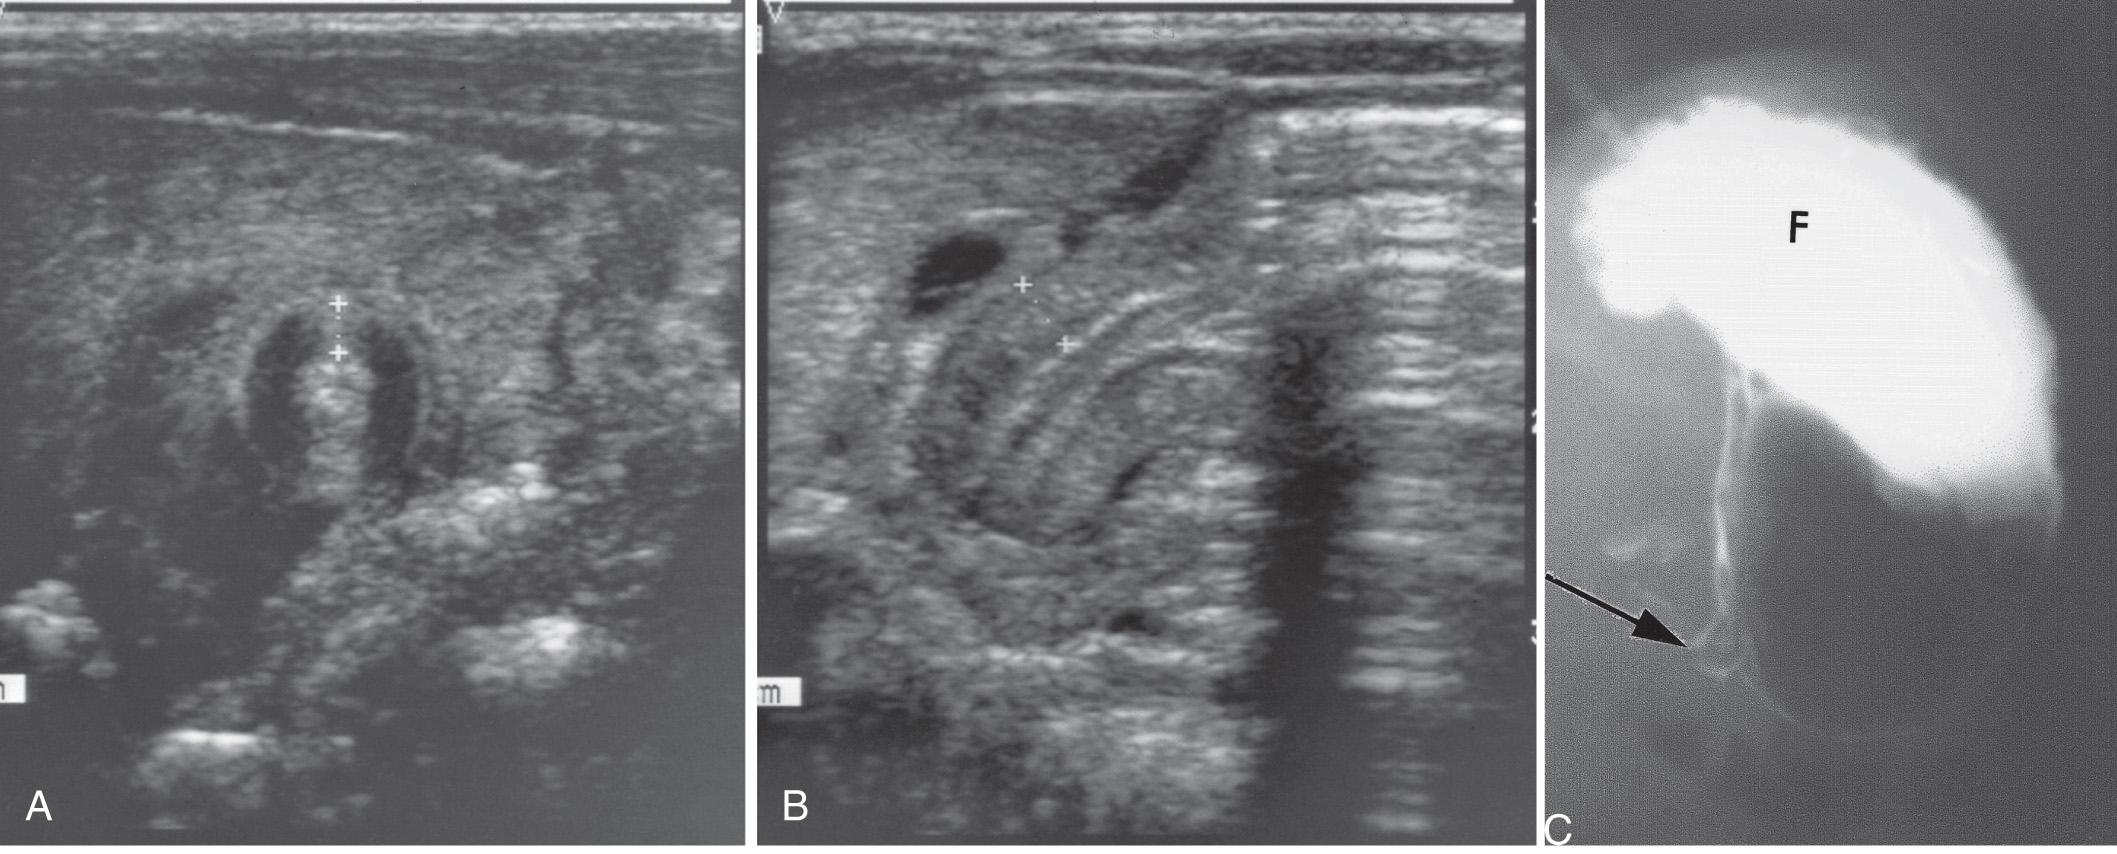 Fig. 11.4, A , Transverse abdominal sonogram demonstrating a pyloric muscle wall thickness of greater than 4 mm (distance between crosses) . B , Horizontal image demonstrating a pyloric channel length greater than 14 mm in an infant with hypertrophic pyloric stenosis. C , Contrast radiograph of the stomach in a 1-month-old male infant with pyloric stenosis. Note the narrowed pyloric end (arrow) and the distended fundus (F) of the stomach, filled with contrast material.